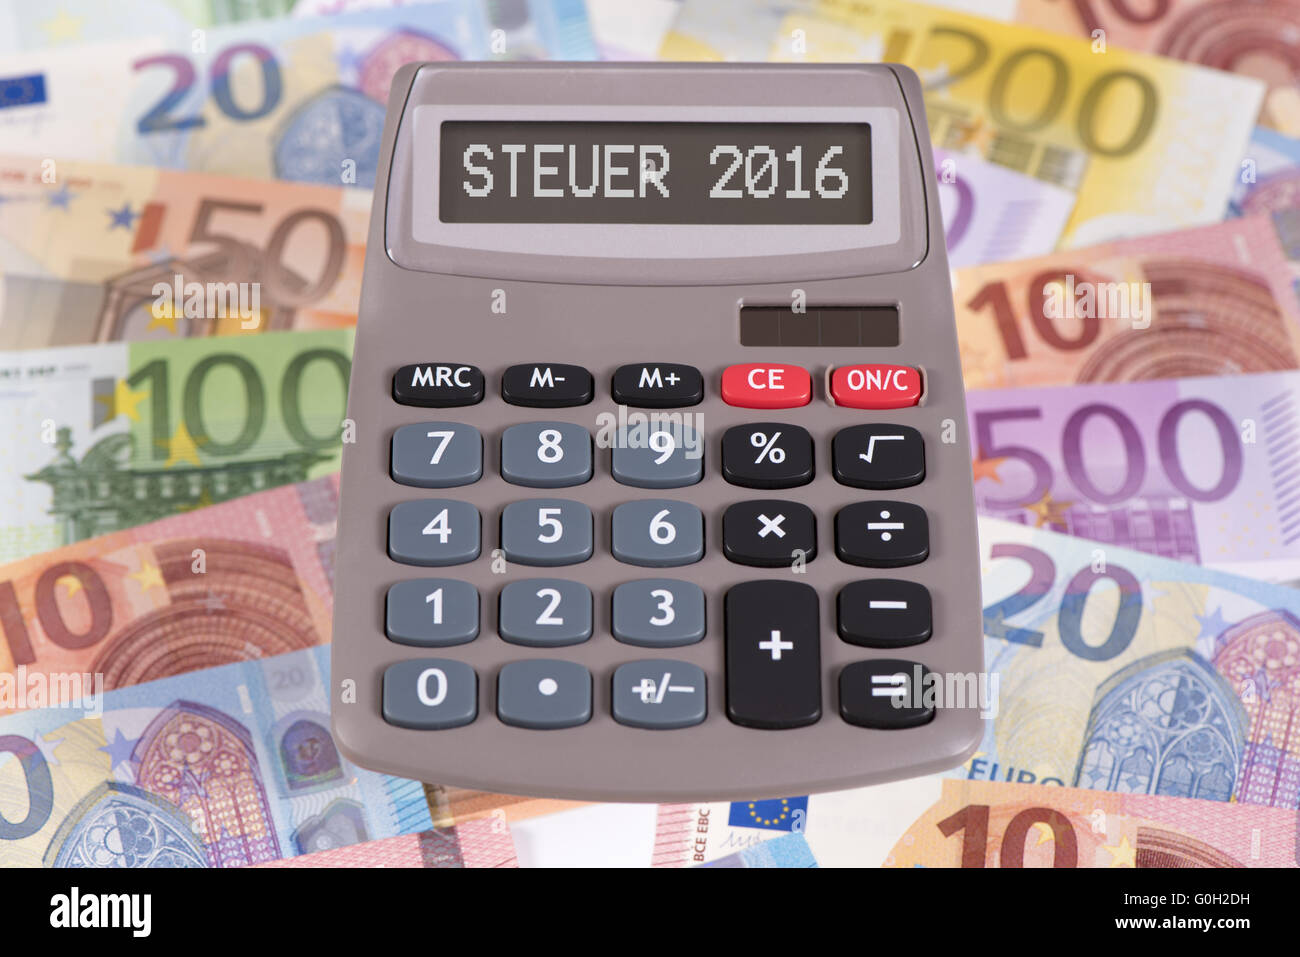 financial calculator with display 2016 on euro banknotes Stock Photo